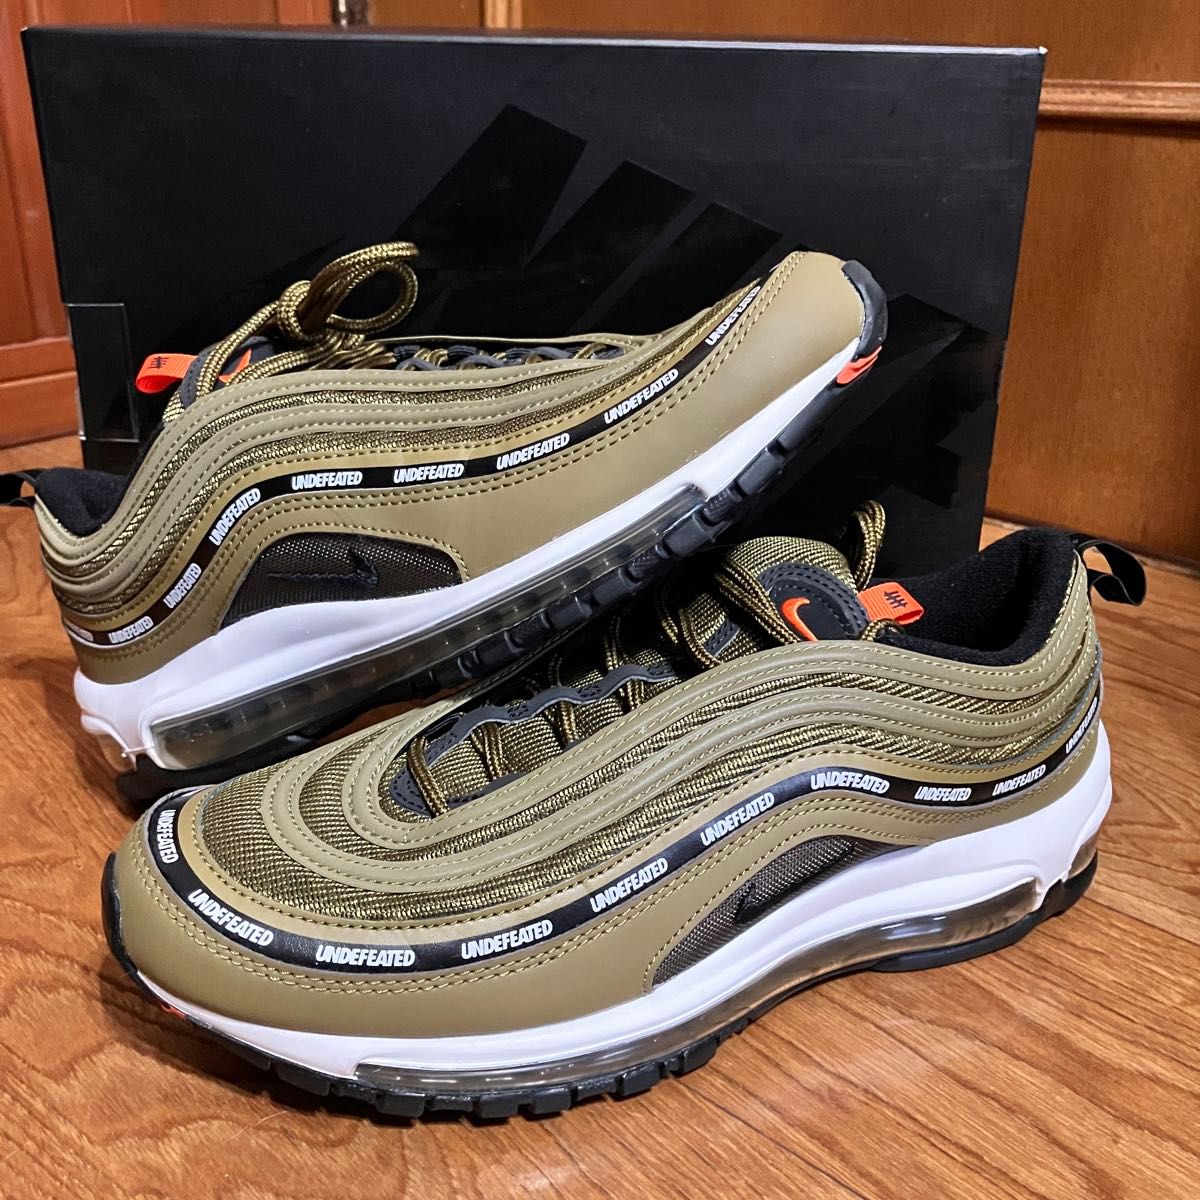 27cm NIKE UNDEFEATED × AIR MAX 97 "OLIVE" DC4830-300 アンディ エアマックス